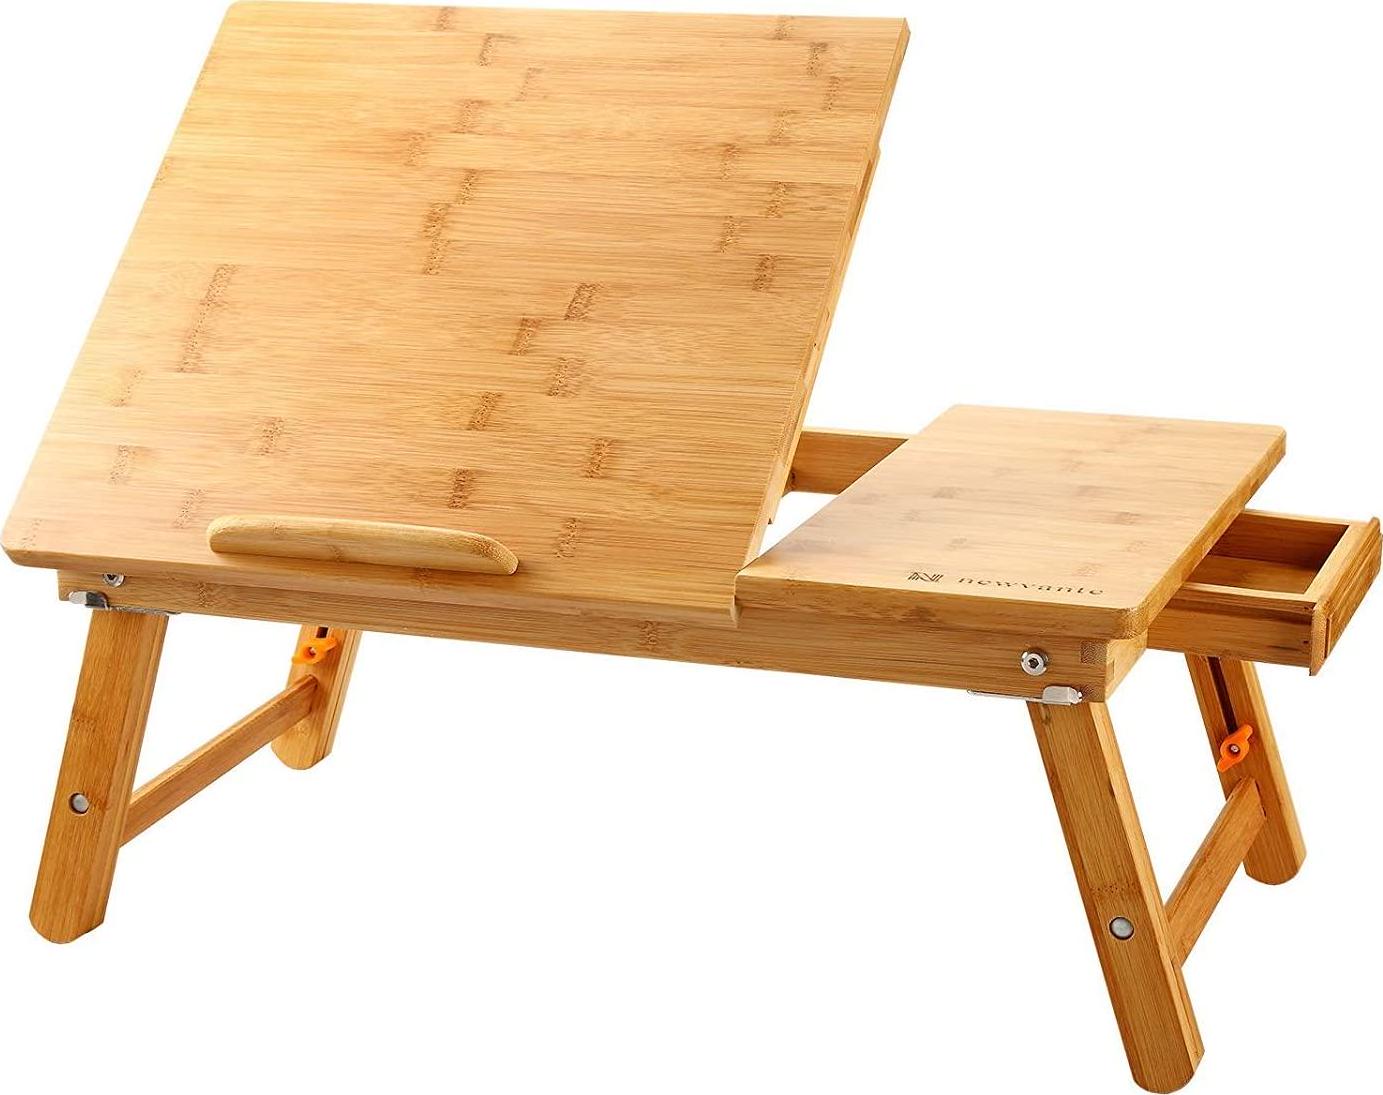 newvante, Laptop Desk Newvante Table Adjustable 100% Bamboo Foldable Breakfast Serving Bed Tray w' Tilting Top Drawer